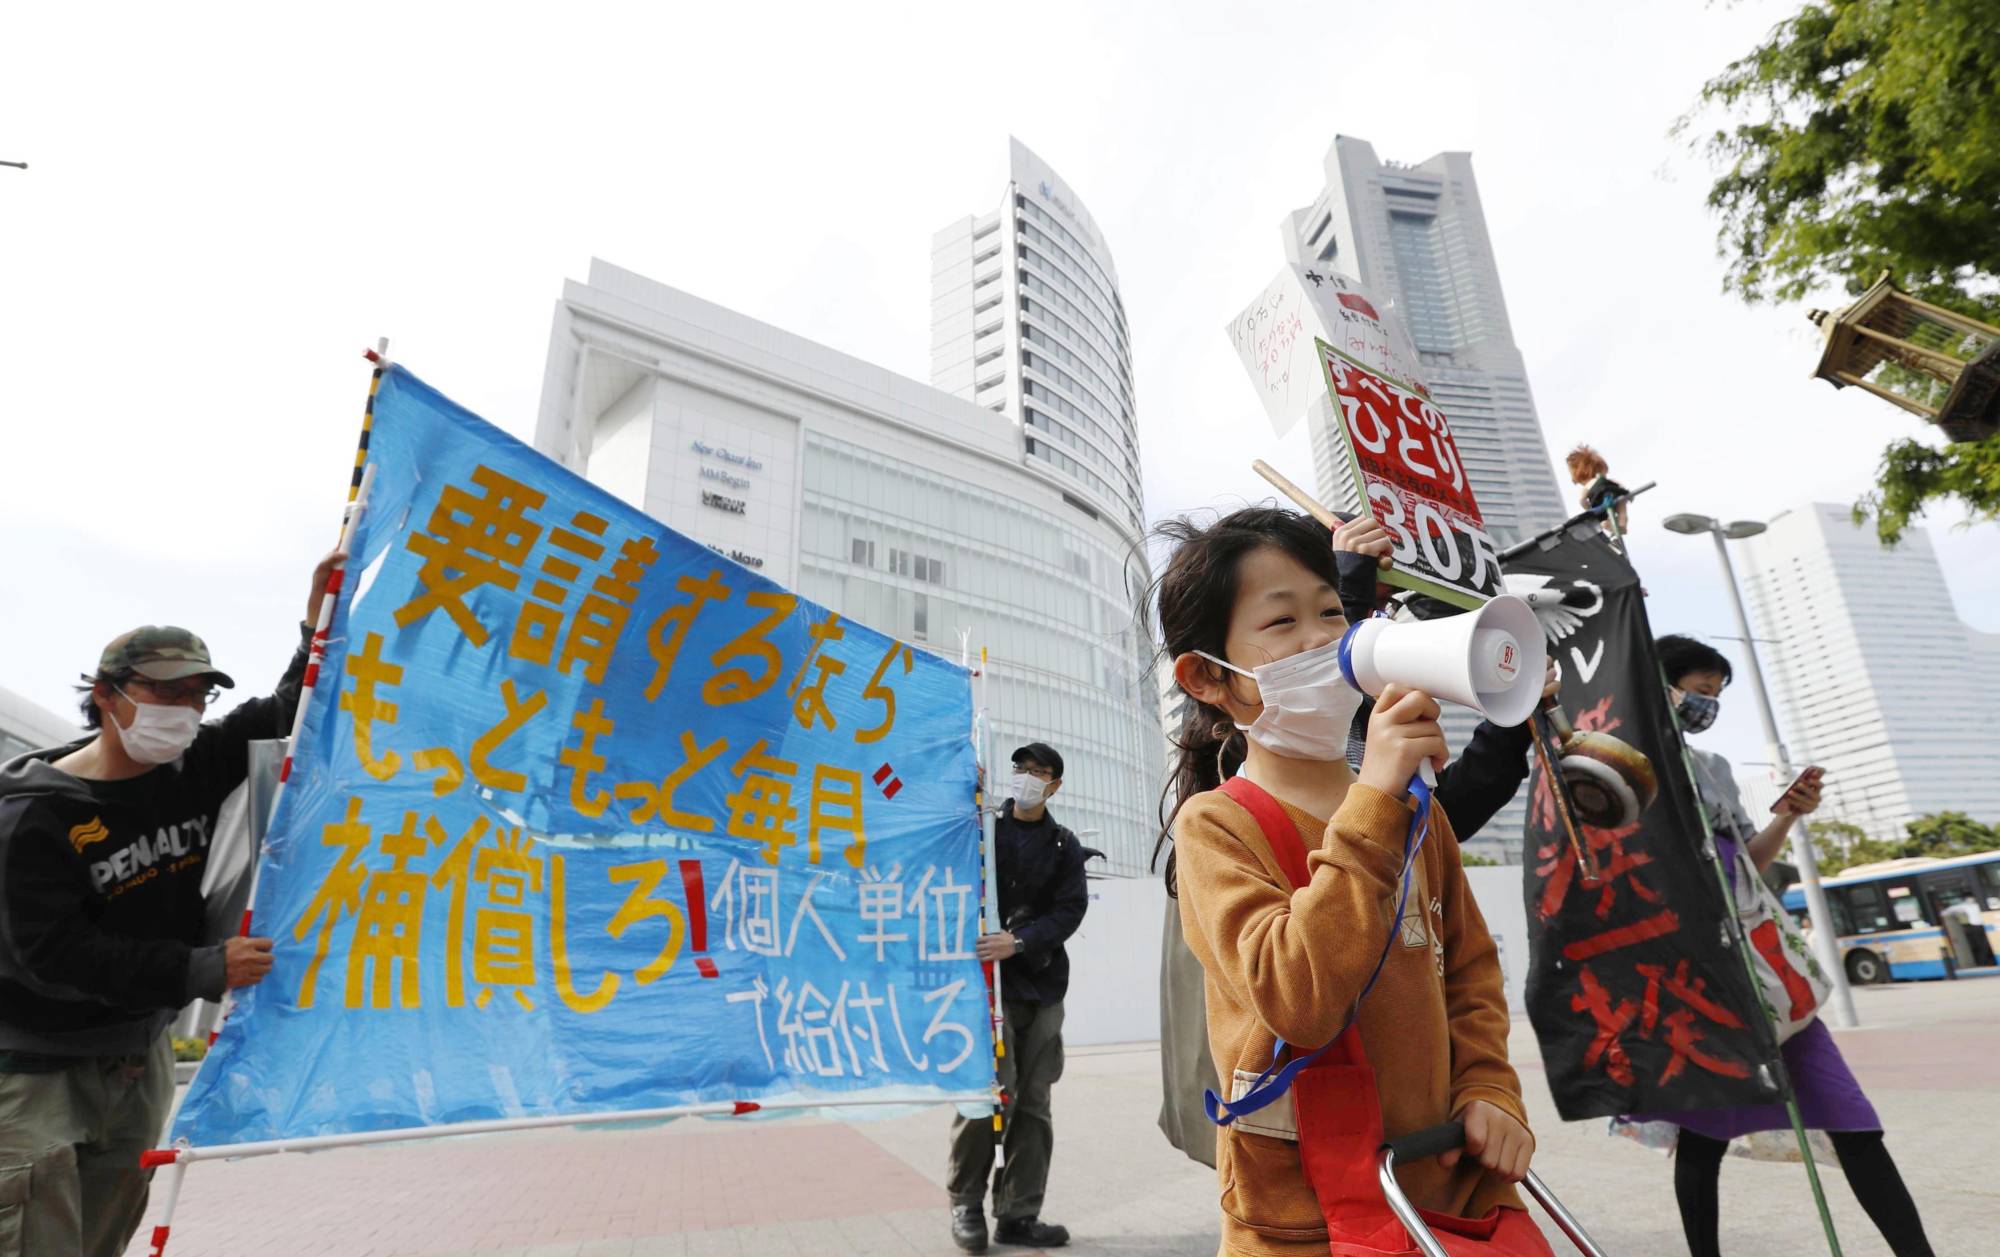 Protesters in Japan calling for legal protection for freelance workers. Image Source: Japan Times